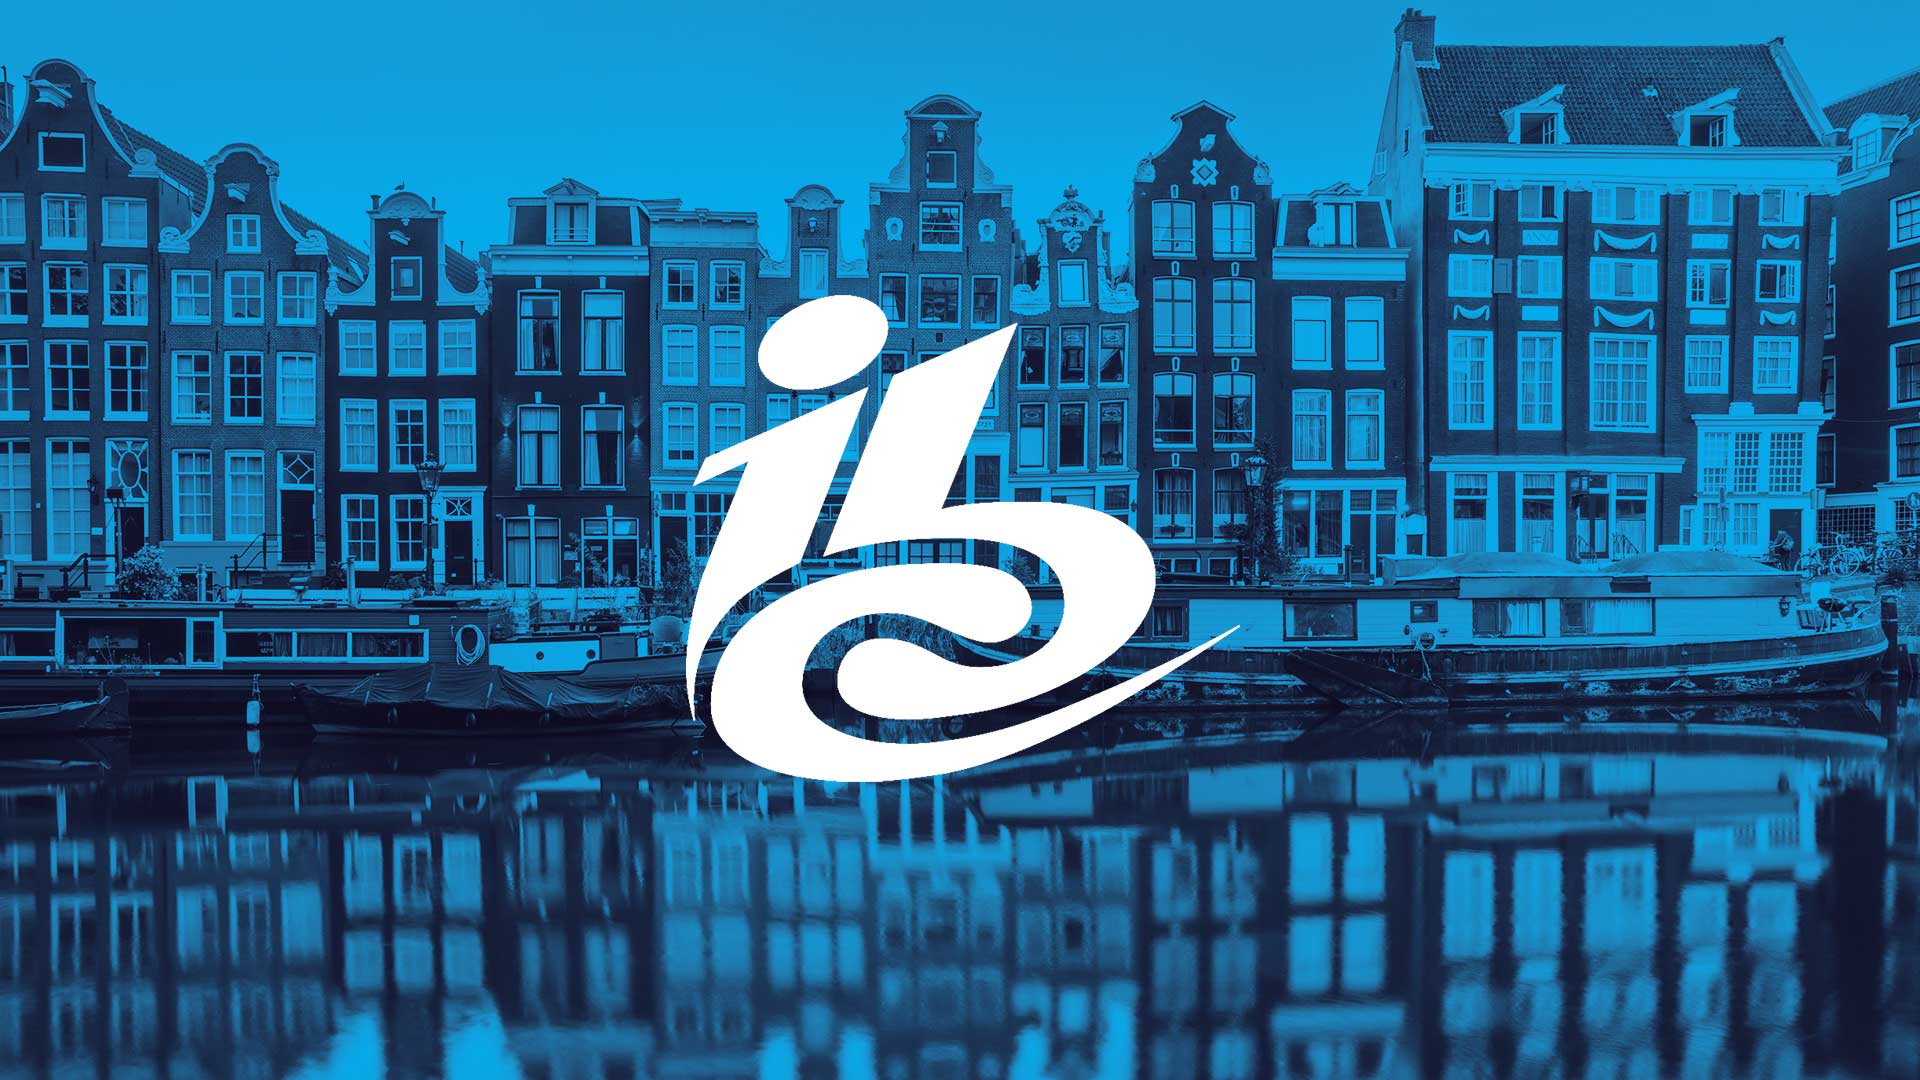 IBC 2022, 3 years in the making!